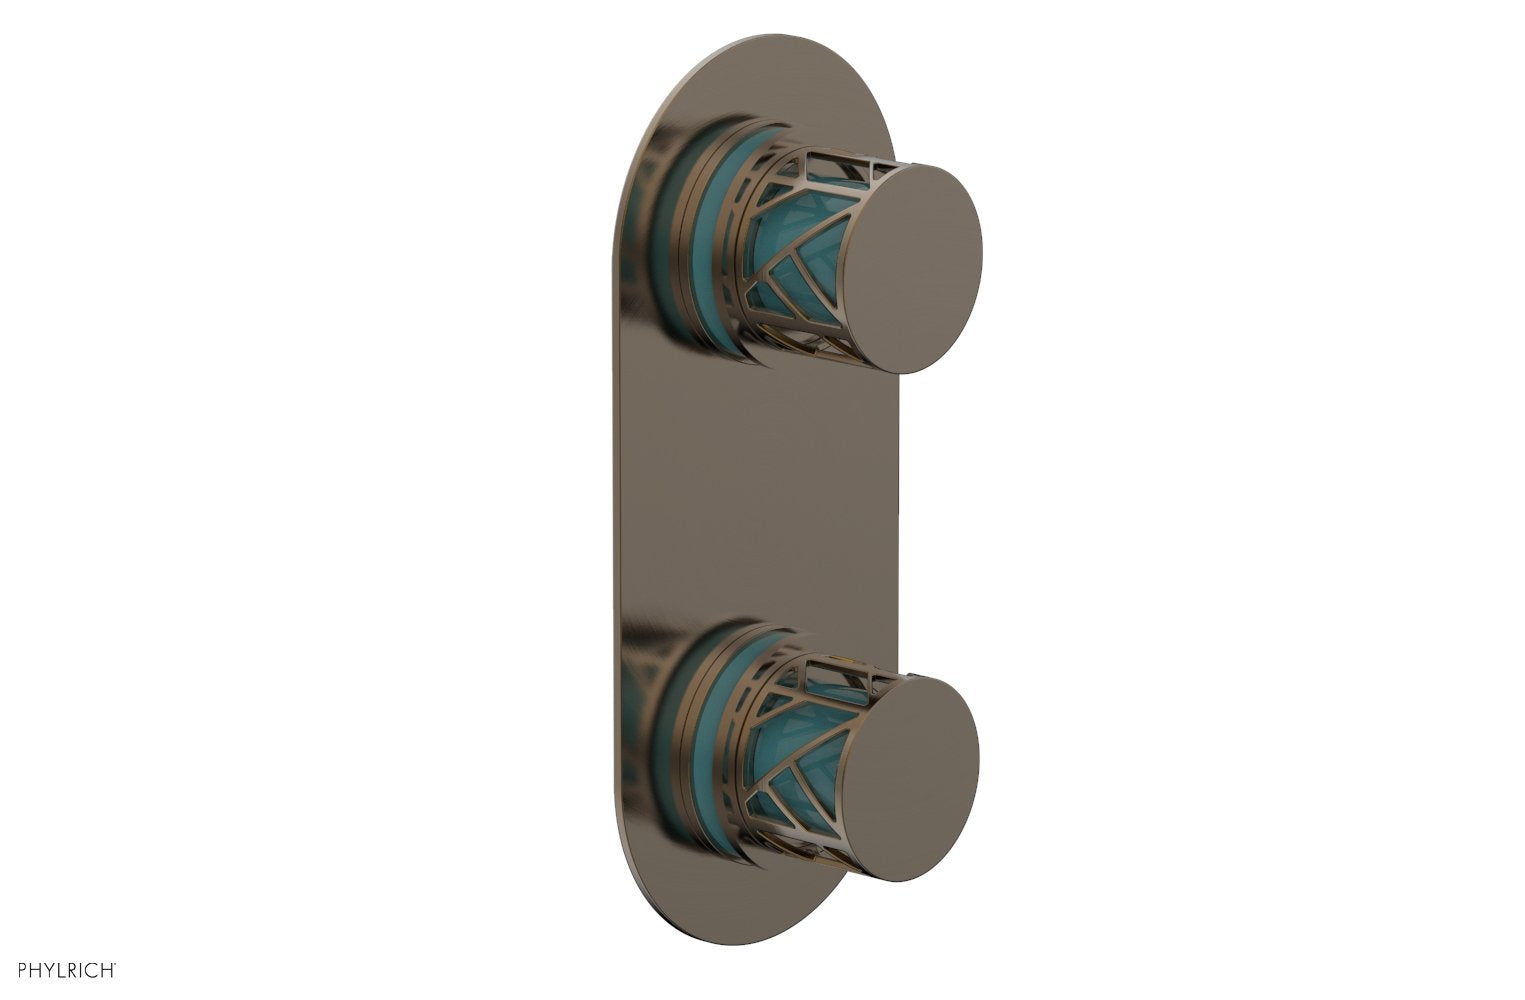 Phylrich JOLIE Thermostatic Valve with Volume Control or Diverter with "Turquoise" Accents